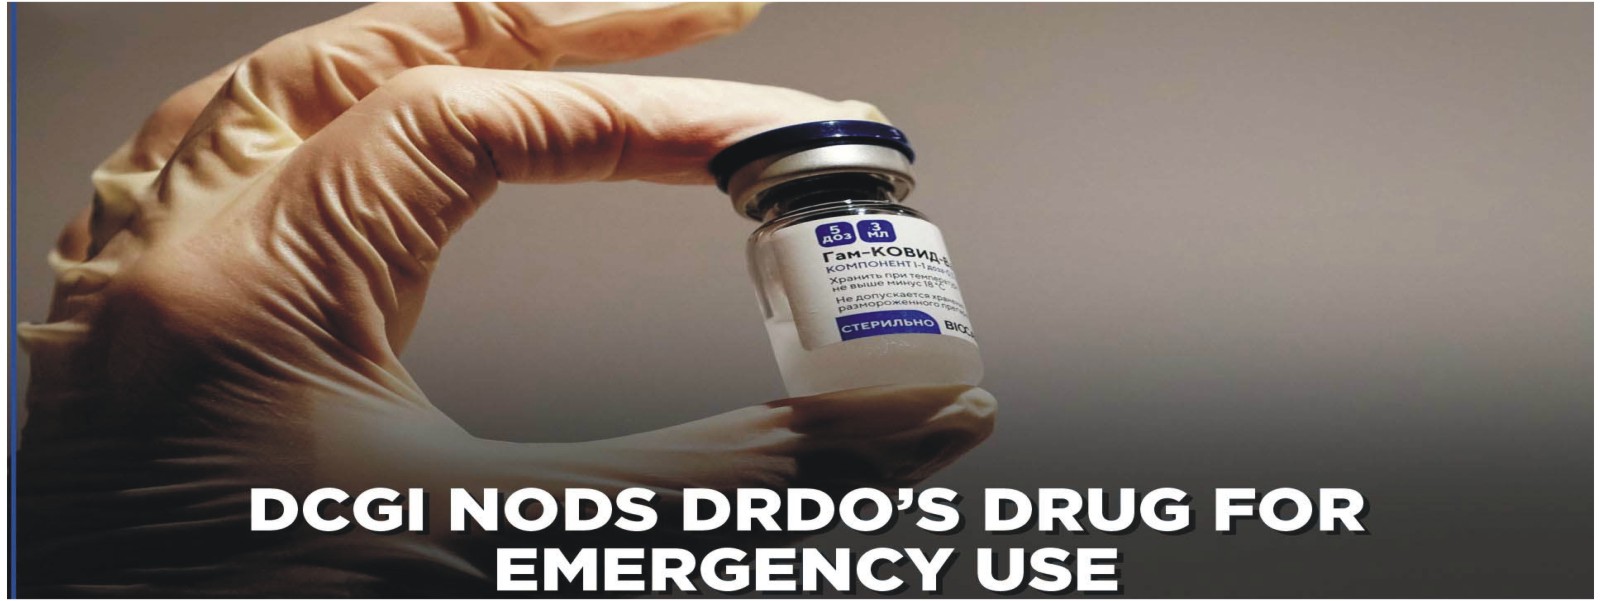 DRDO'S Covid-19 Drug 2-DG Approved by the DCGI of India.